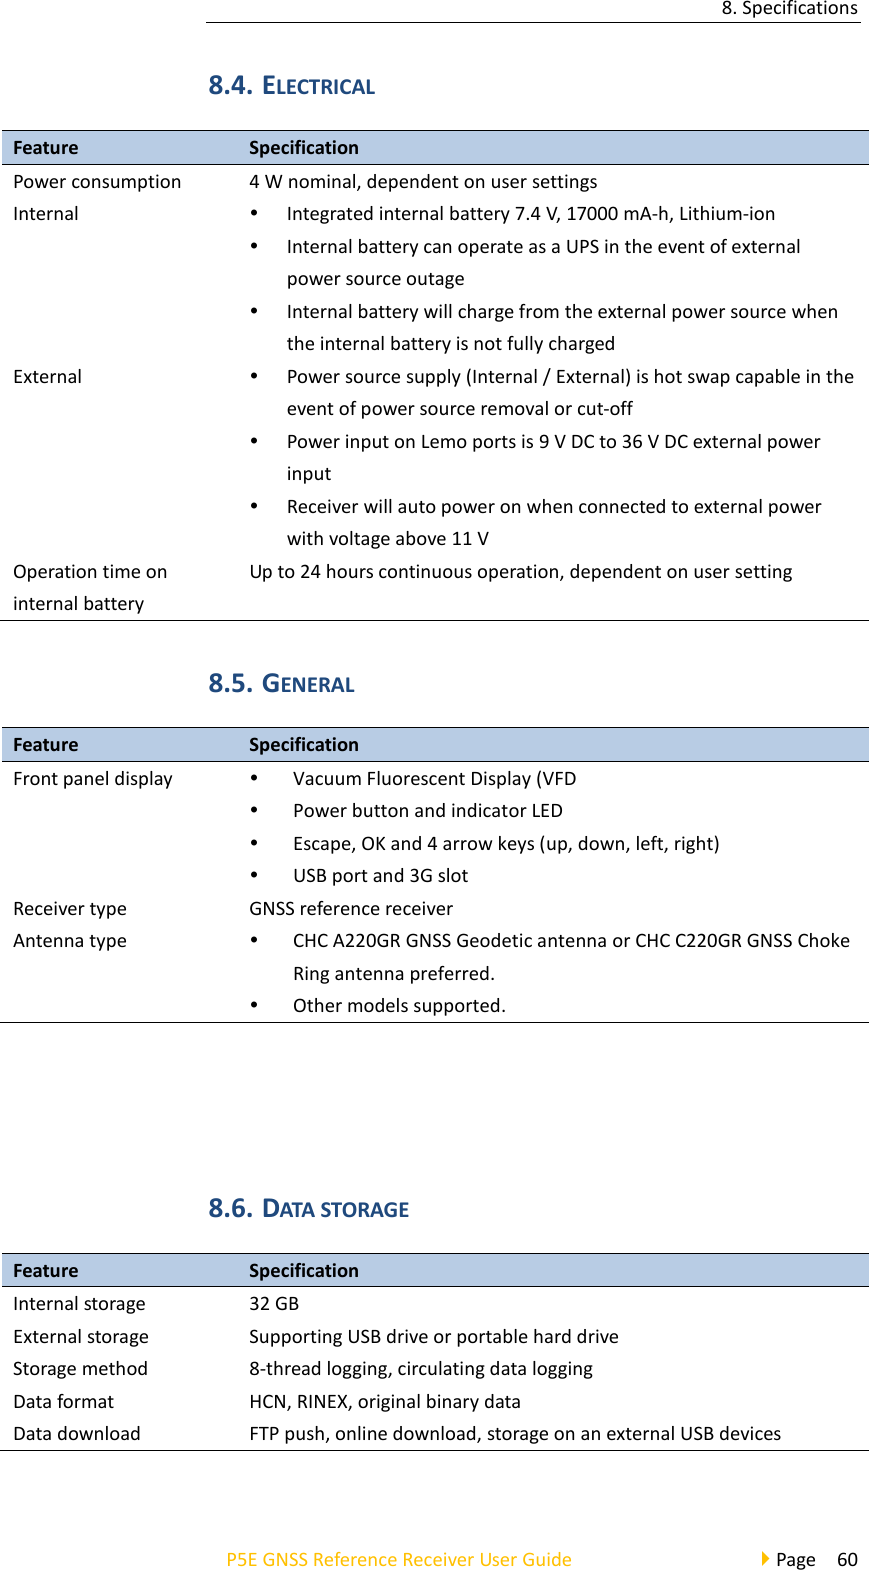 8. Specifications P5E GNSS Reference Receiver User Guide                                     Page  60 8.4. ELECTRICAL   Feature   Specification Power consumption 4 W nominal, dependent on user settings   Internal  Integrated internal battery 7.4 V, 17000 mA-h, Lithium-ion  Internal battery can operate as a UPS in the event of external power source outage  Internal battery will charge from the external power source when the internal battery is not fully charged External  Power source supply (Internal / External) is hot swap capable in the event of power source removal or cut-off    Power input on Lemo ports is 9 V DC to 36 V DC external power input  Receiver will auto power on when connected to external power with voltage above 11 V Operation time on internal battery Up to 24 hours continuous operation, dependent on user setting 8.5. GENERAL Feature   Specification Front panel display  Vacuum Fluorescent Display (VFD  Power button and indicator LED  Escape, OK and 4 arrow keys (up, down, left, right)  USB port and 3G slot Receiver type   GNSS reference receiver Antenna type  CHC A220GR GNSS Geodetic antenna or CHC C220GR GNSS Choke Ring antenna preferred.  Other models supported.     8.6. DATA STORAGE Feature Specification   Internal storage   32 GB External storage Supporting USB drive or portable hard drive Storage method   8-thread logging, circulating data logging Data format HCN, RINEX, original binary data Data download   FTP push, online download, storage on an external USB devices  